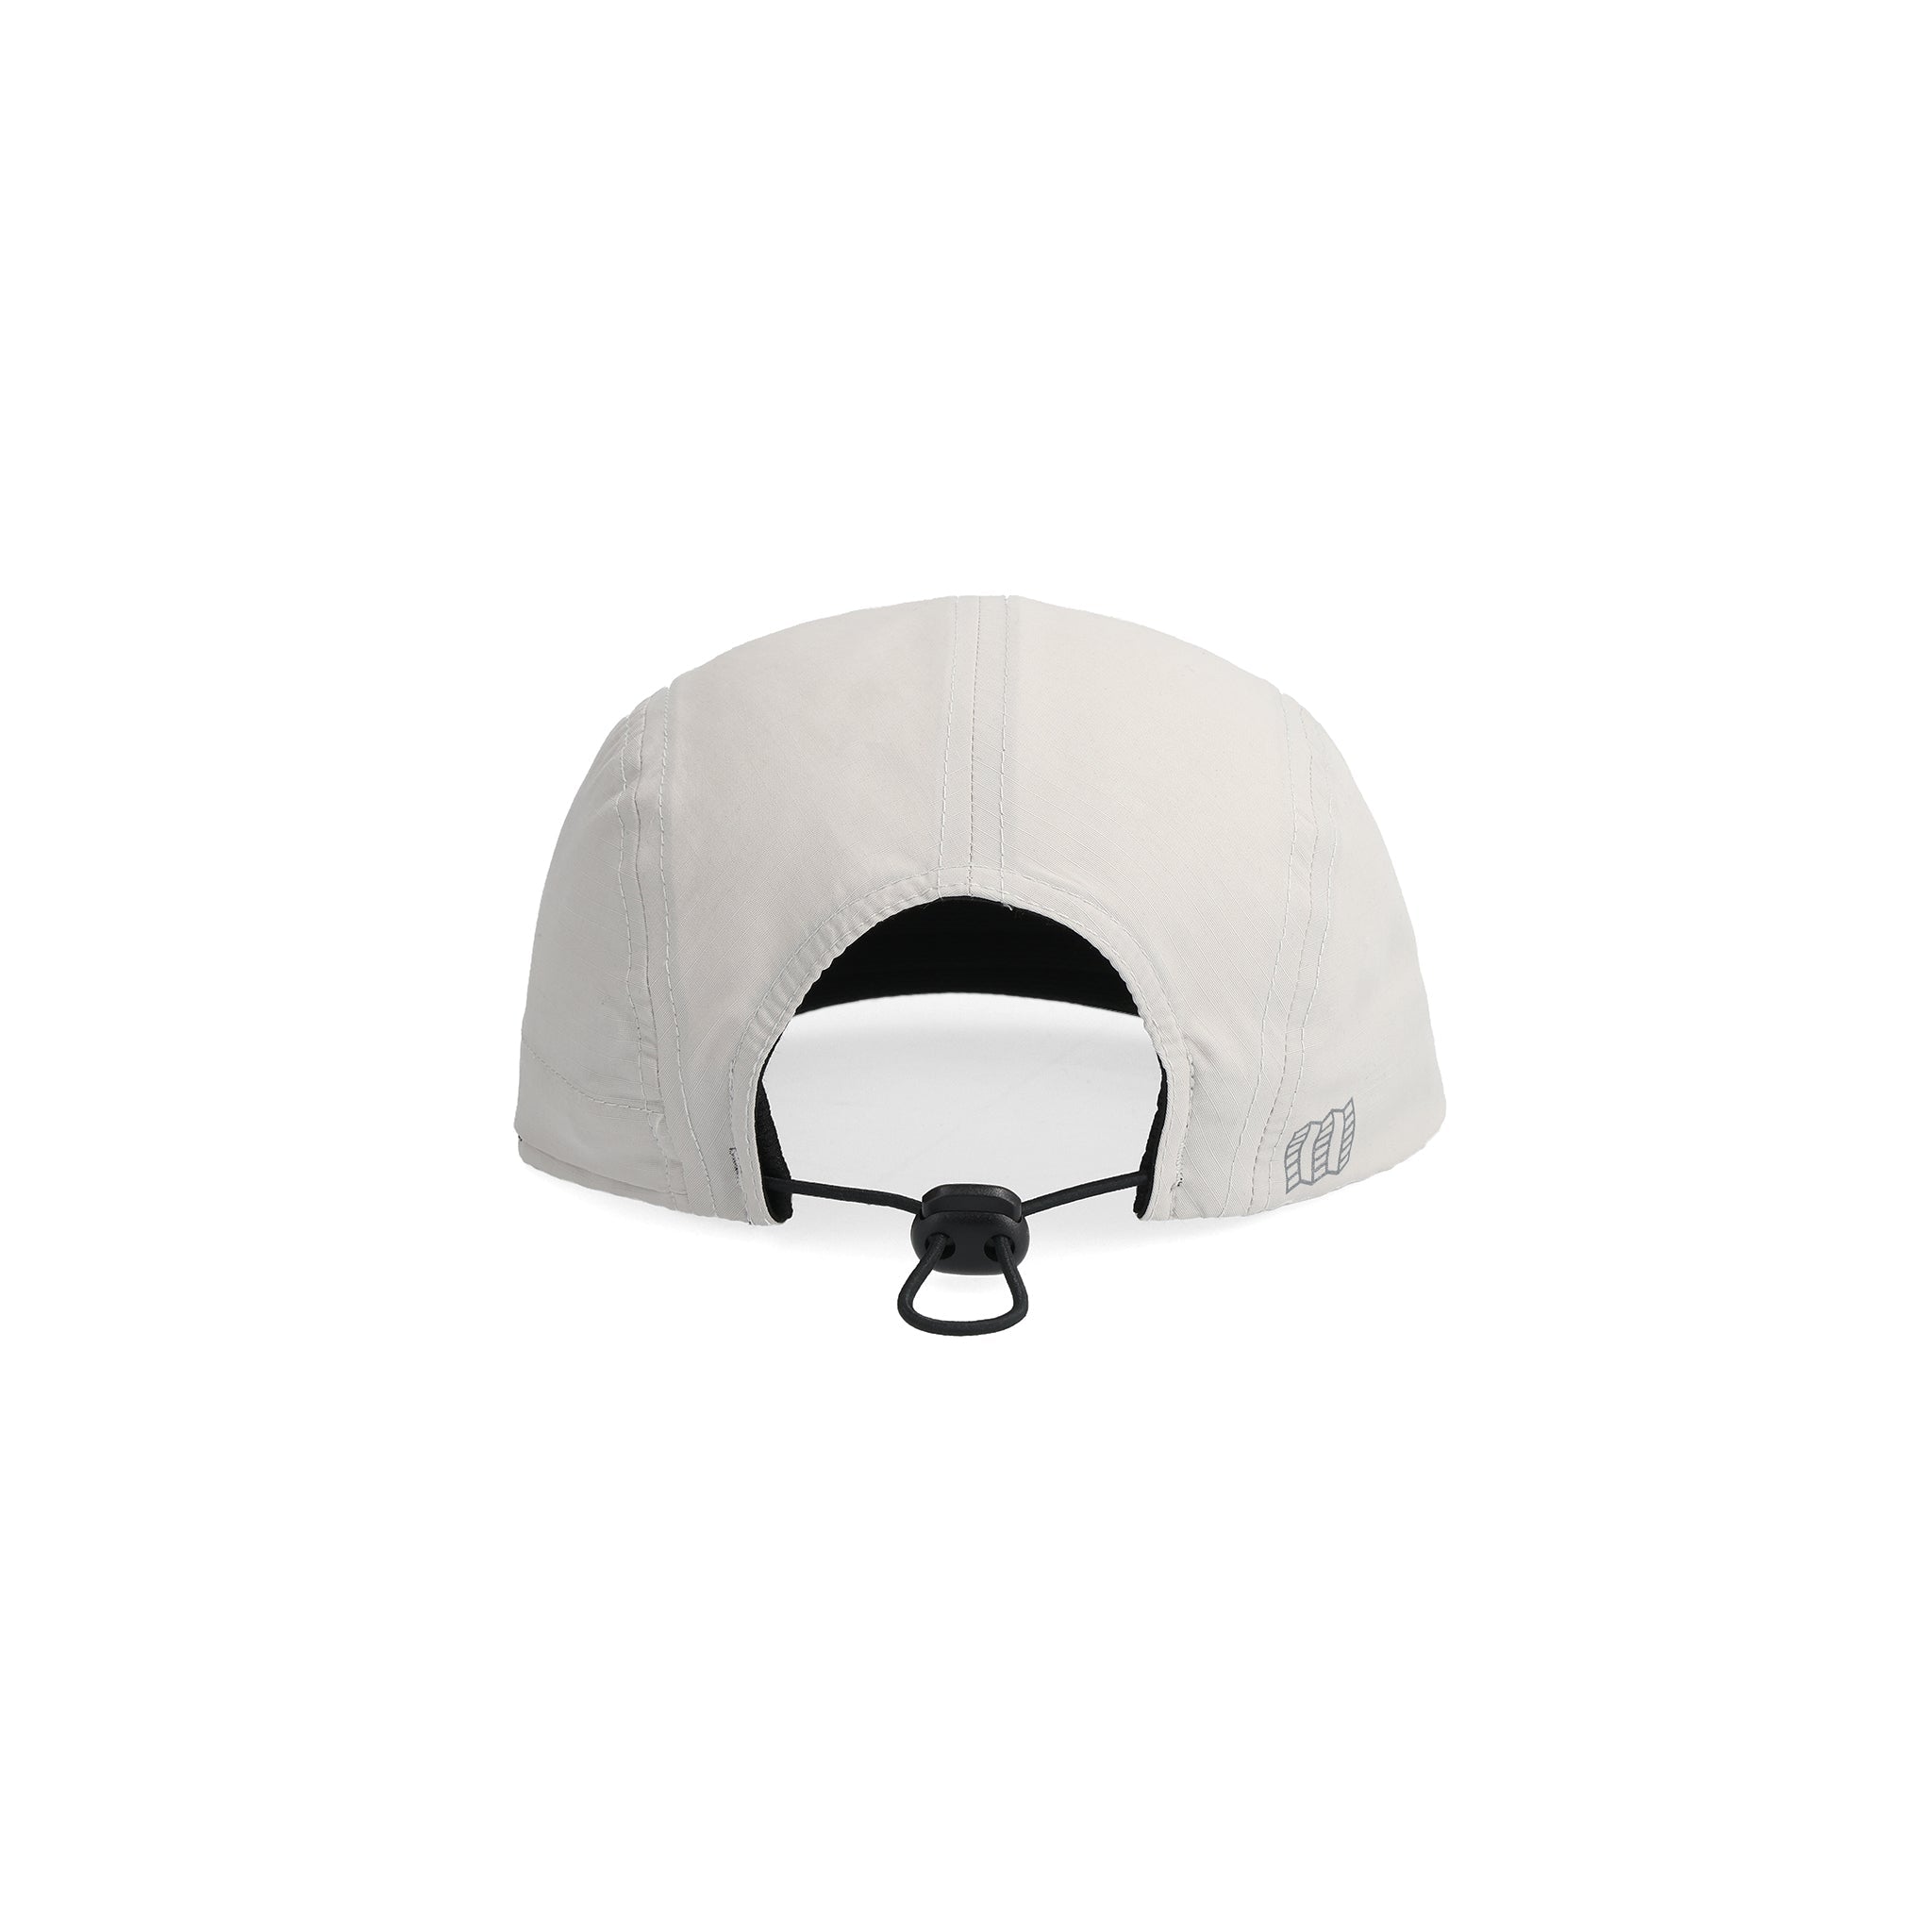 Back View of Topo Designs Global Packable Hat in "Light Gray"